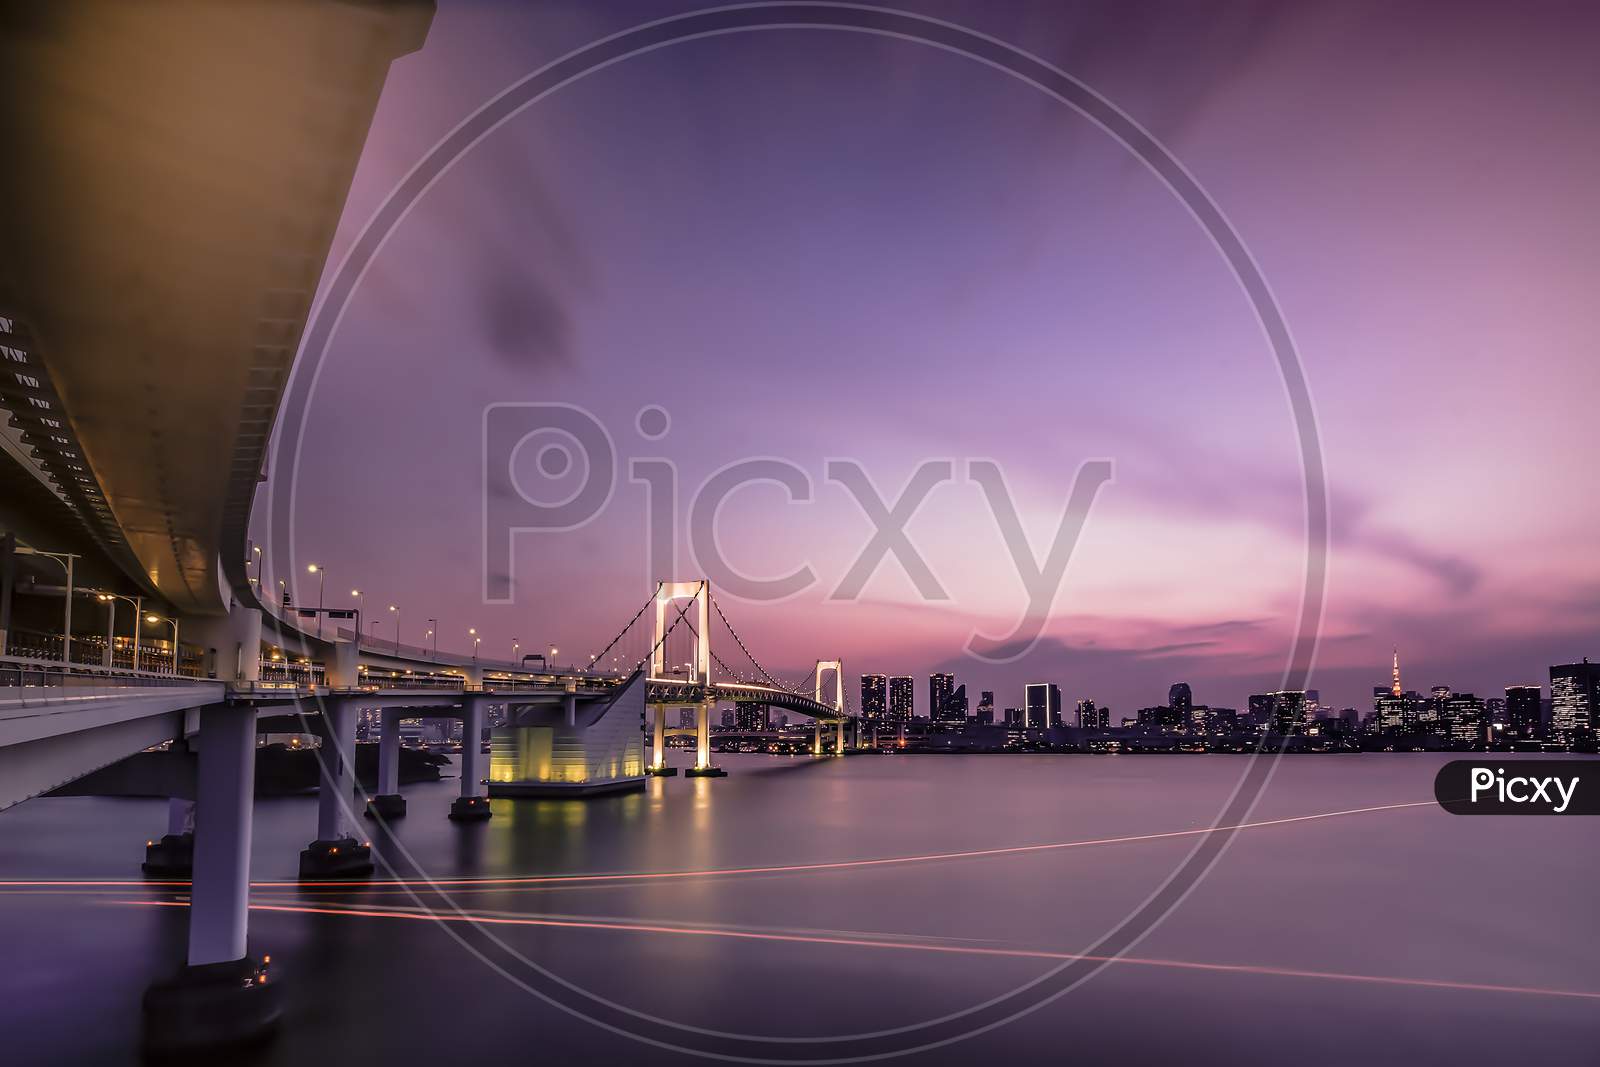 Long Exposure Photography Of Sunset On Rainbow Bridge And Tokyo Bay In Background.